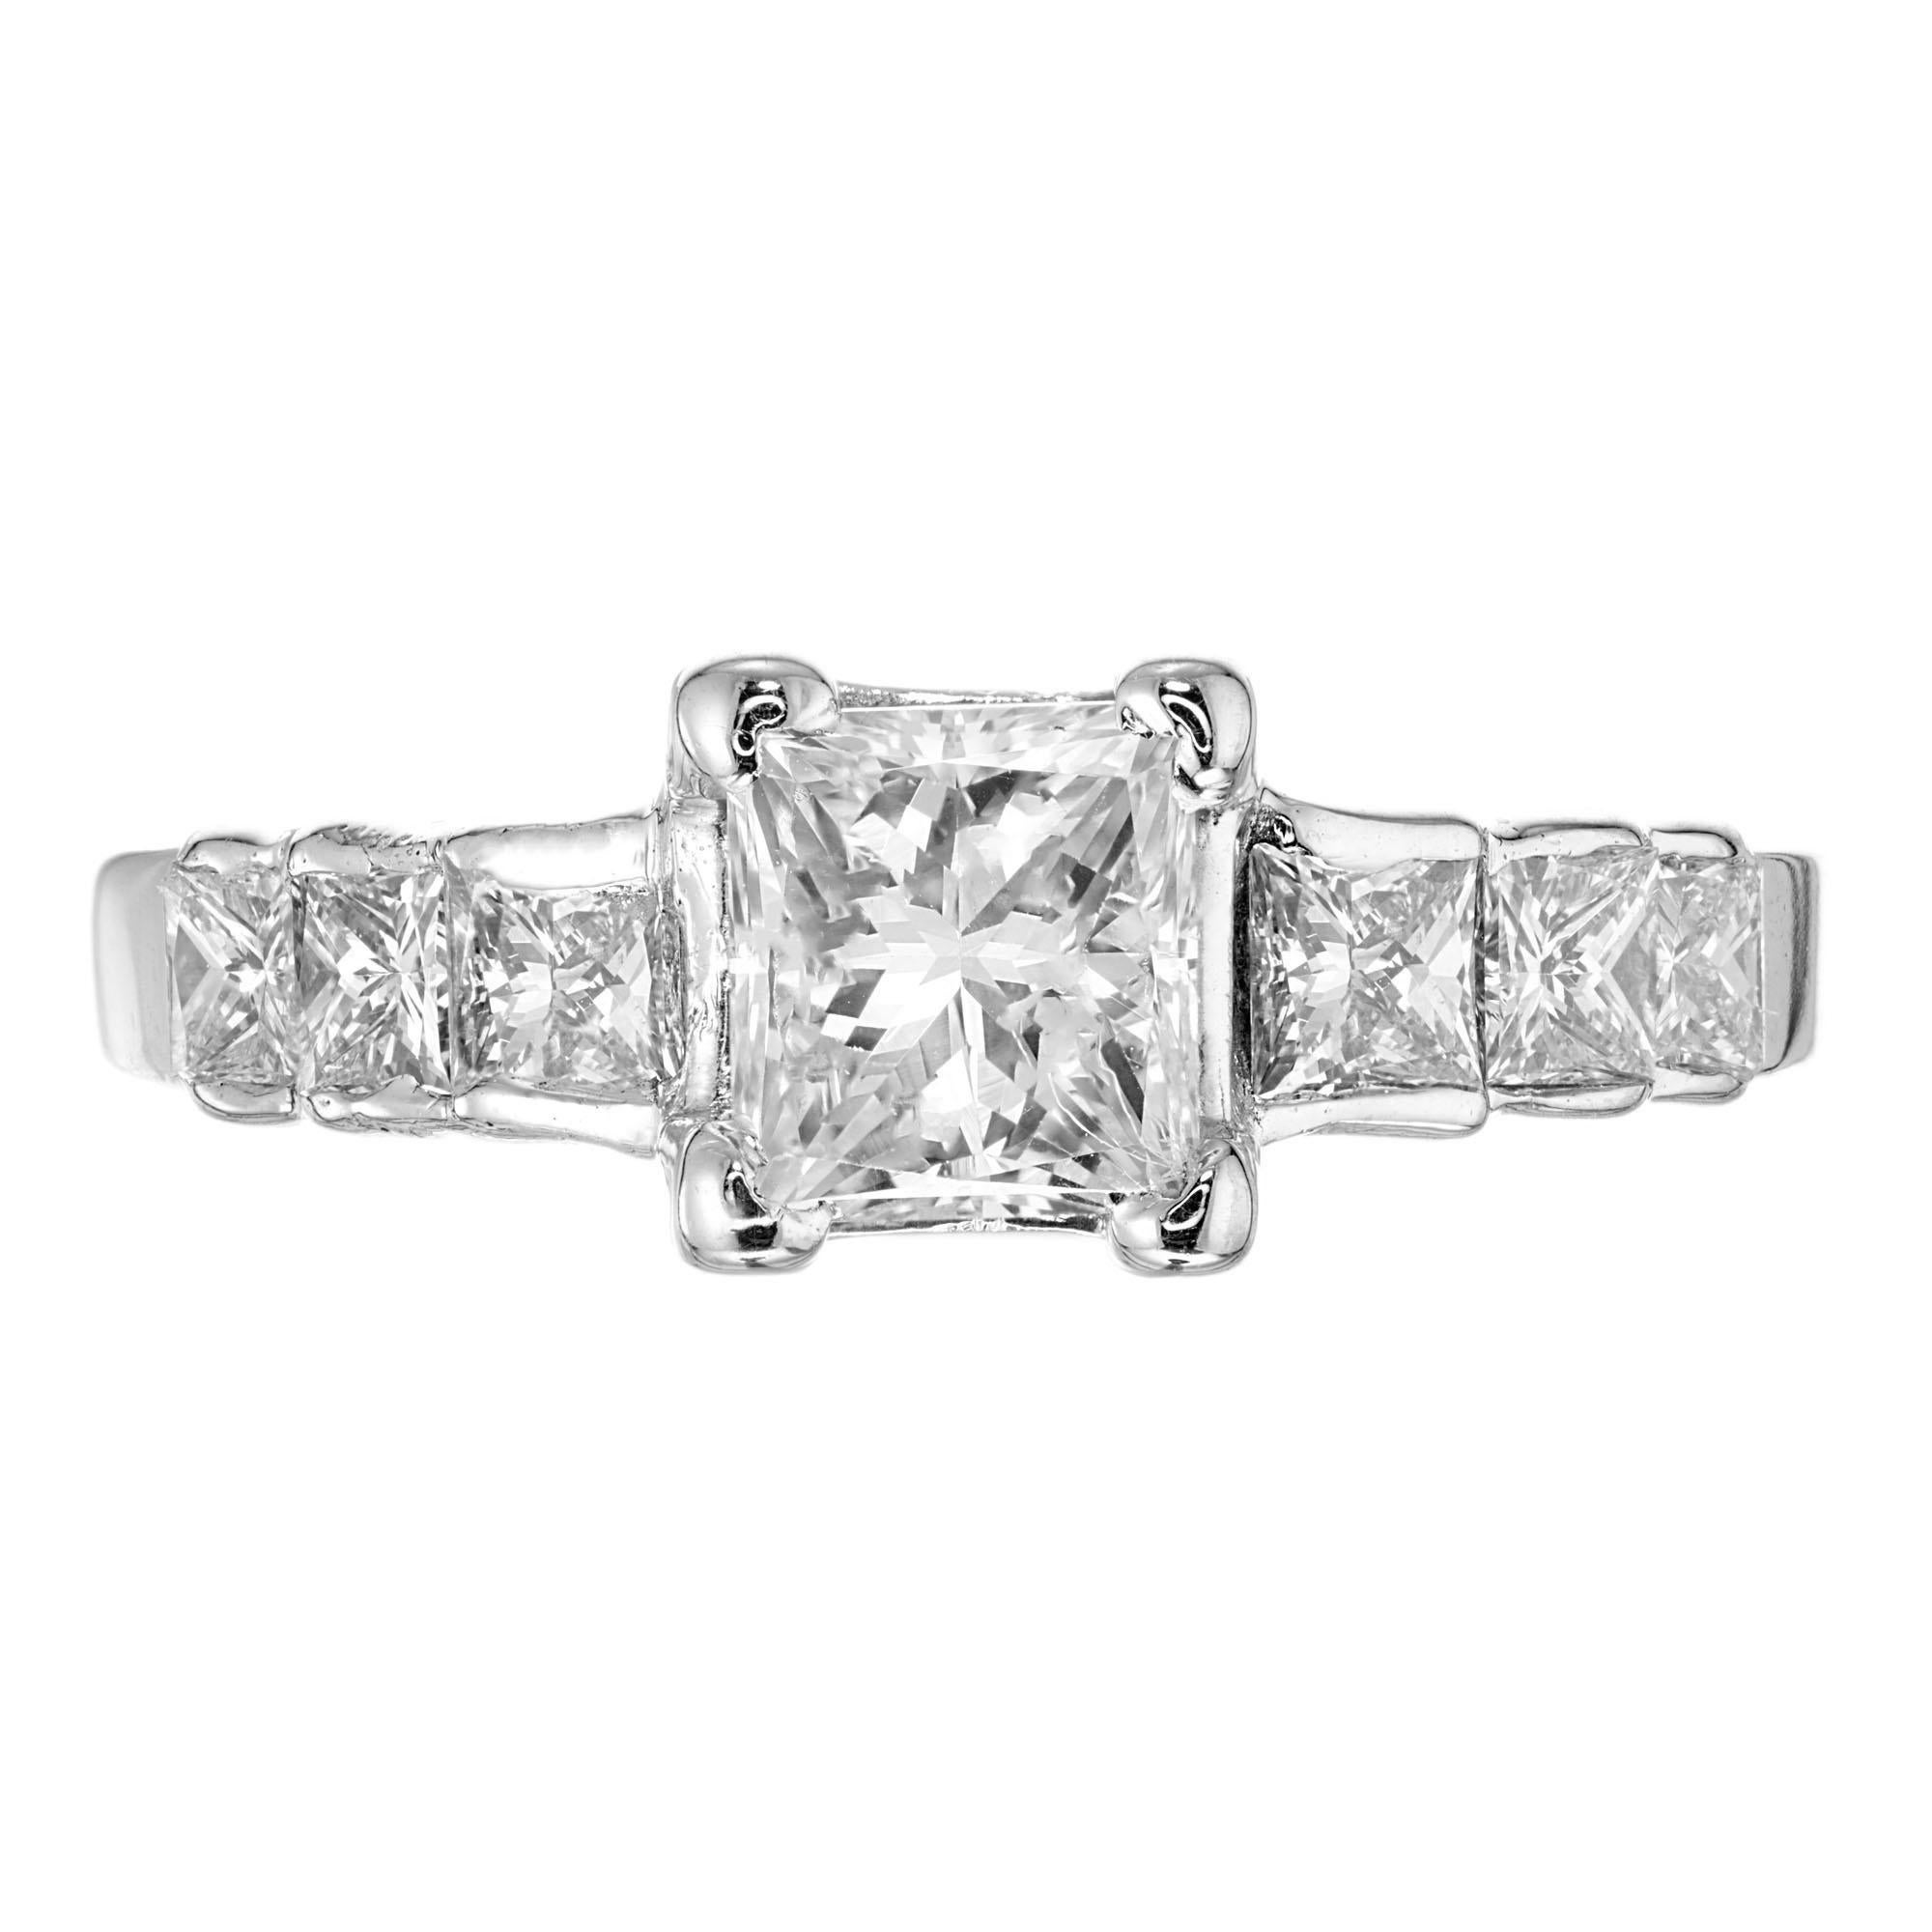 Diamond engagement ring. EGL certified rectangle cut diamond center stone with 6 princess cut graduated accent diamonds in a 14k white gold setting. 

1 rectangular diamond, approx. total weight .75cts, VS2,
6 square Princess cut diamonds, approx.